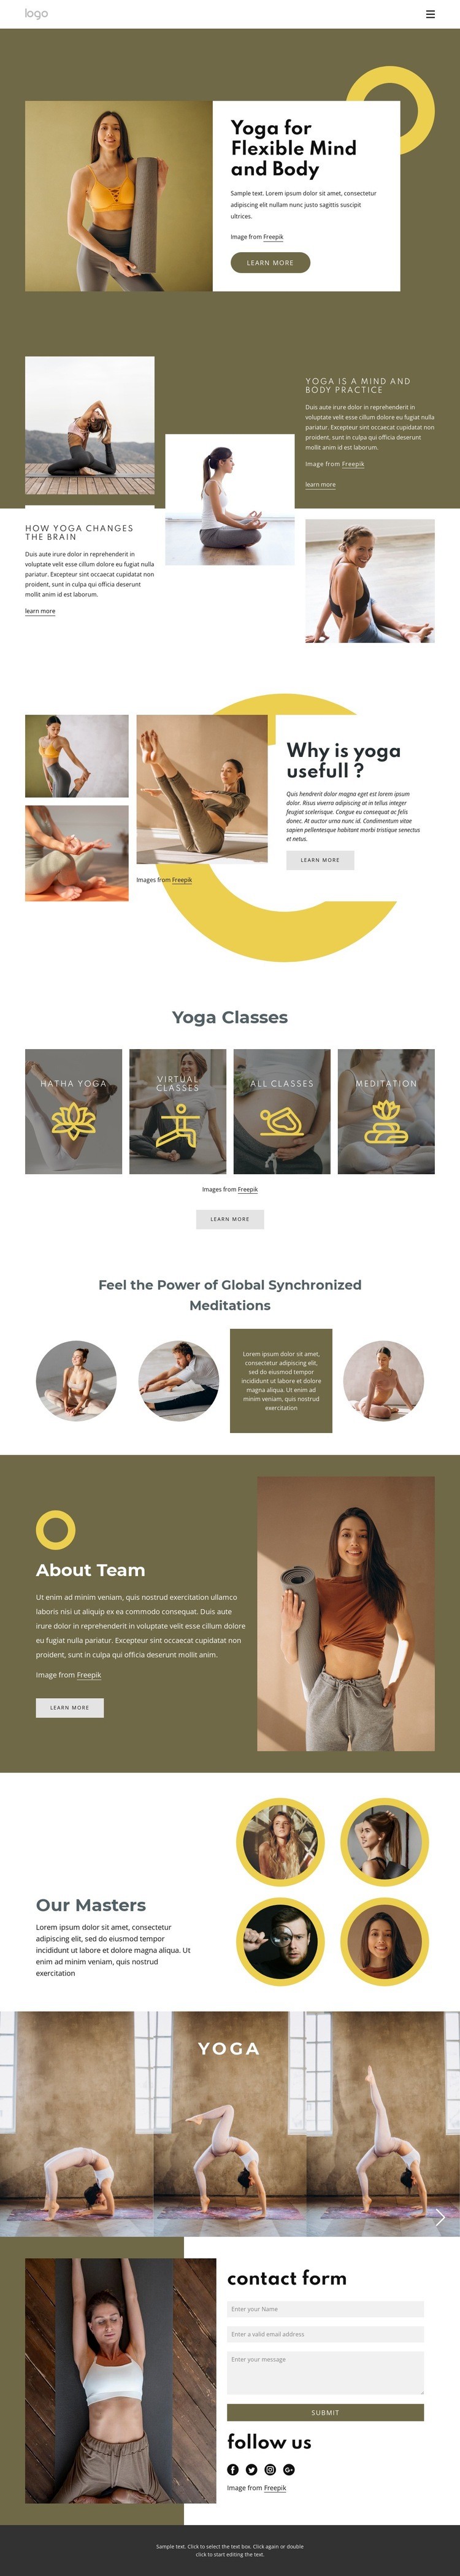 Traditional style yoga Web Page Designer